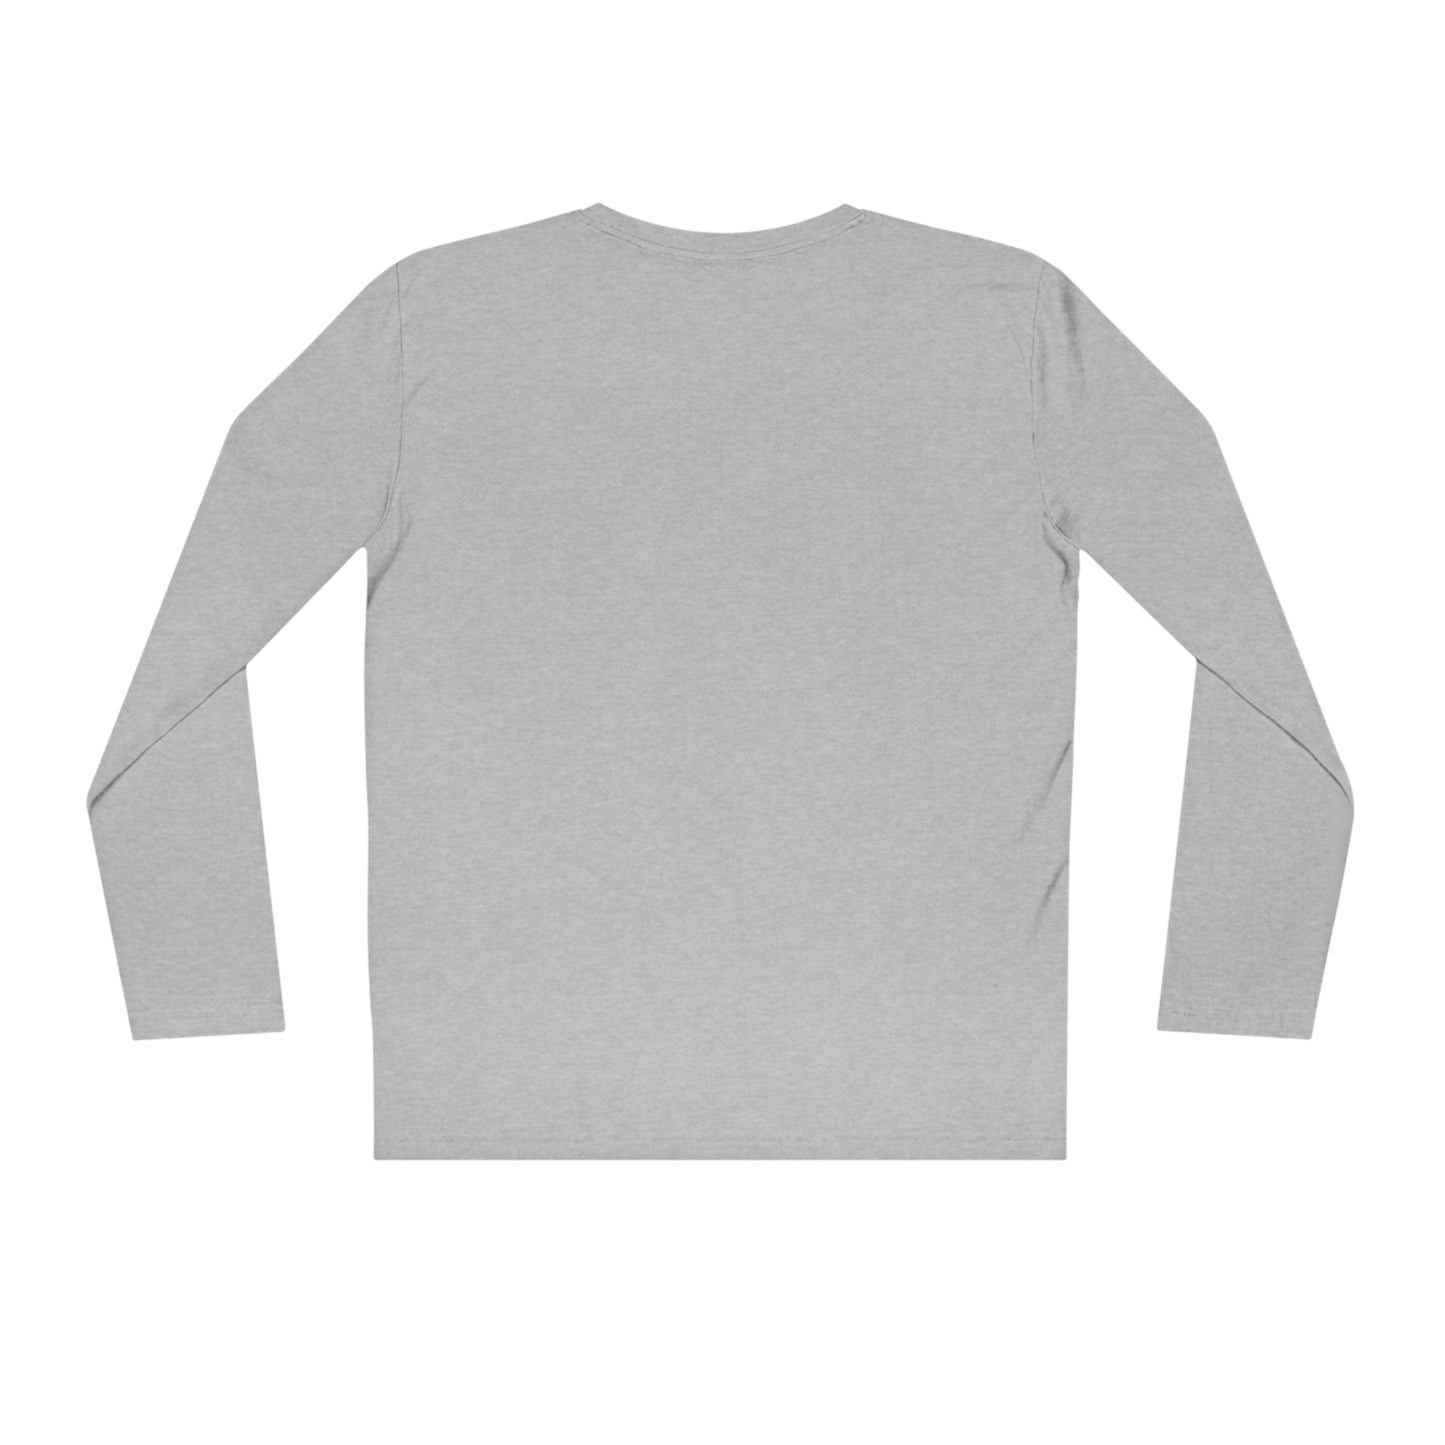 Eco-Friendly - Unisex's Organic Sparker Long Sleeve Shirt - International Day of Forests graphic